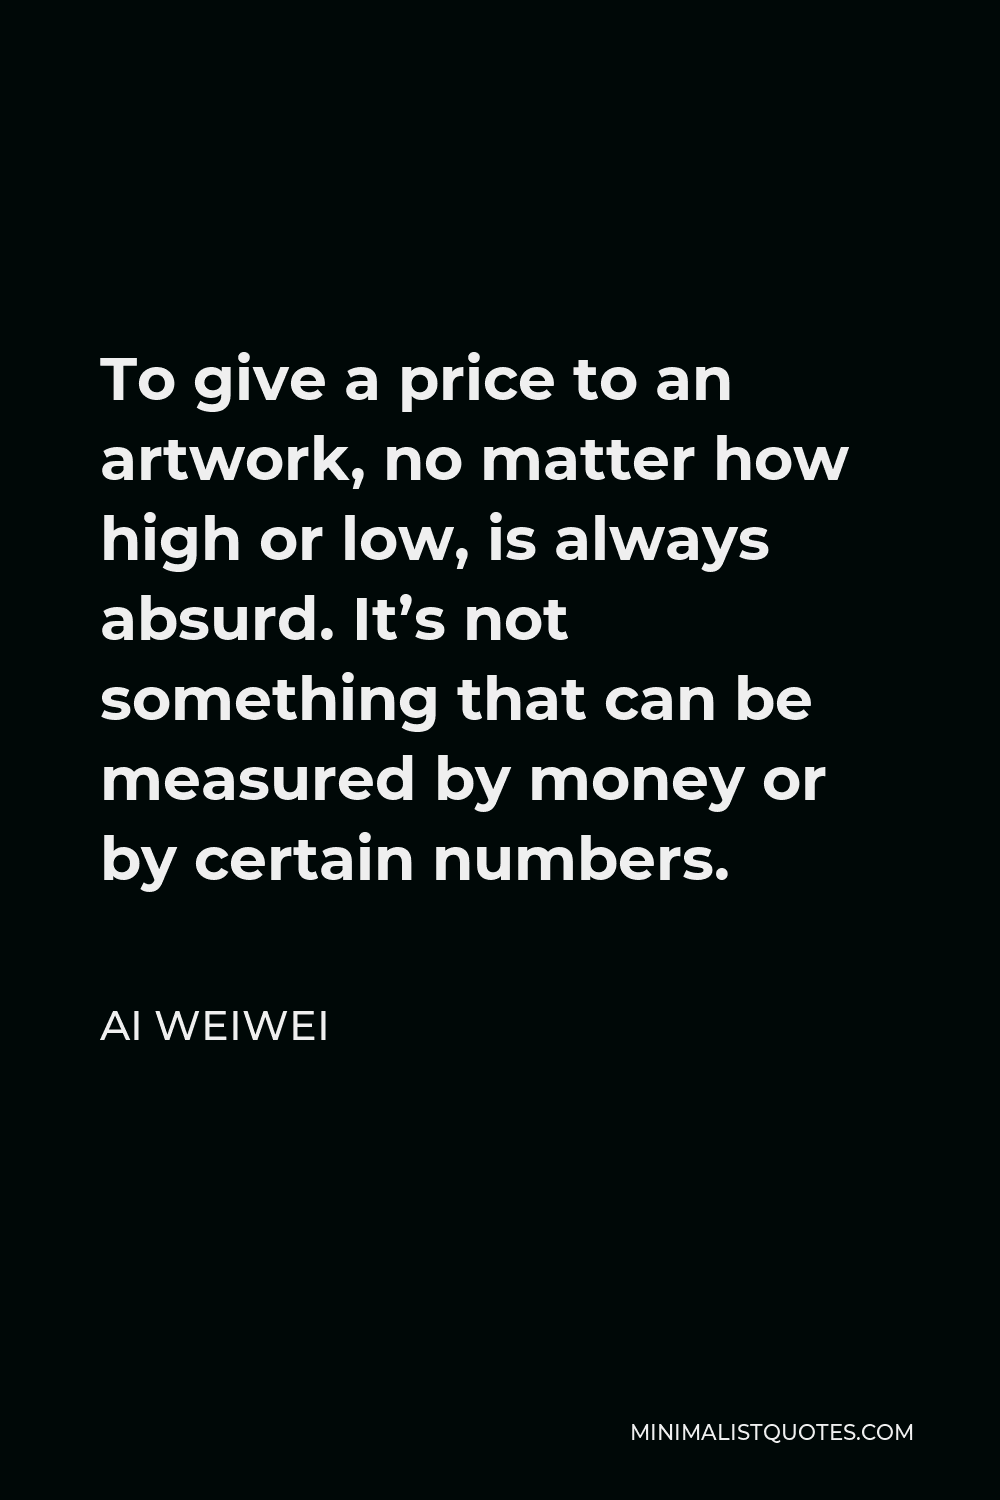 Ai Weiwei Quote - To give a price to an artwork, no matter how high or low, is always absurd. It’s not something that can be measured by money or by certain numbers.